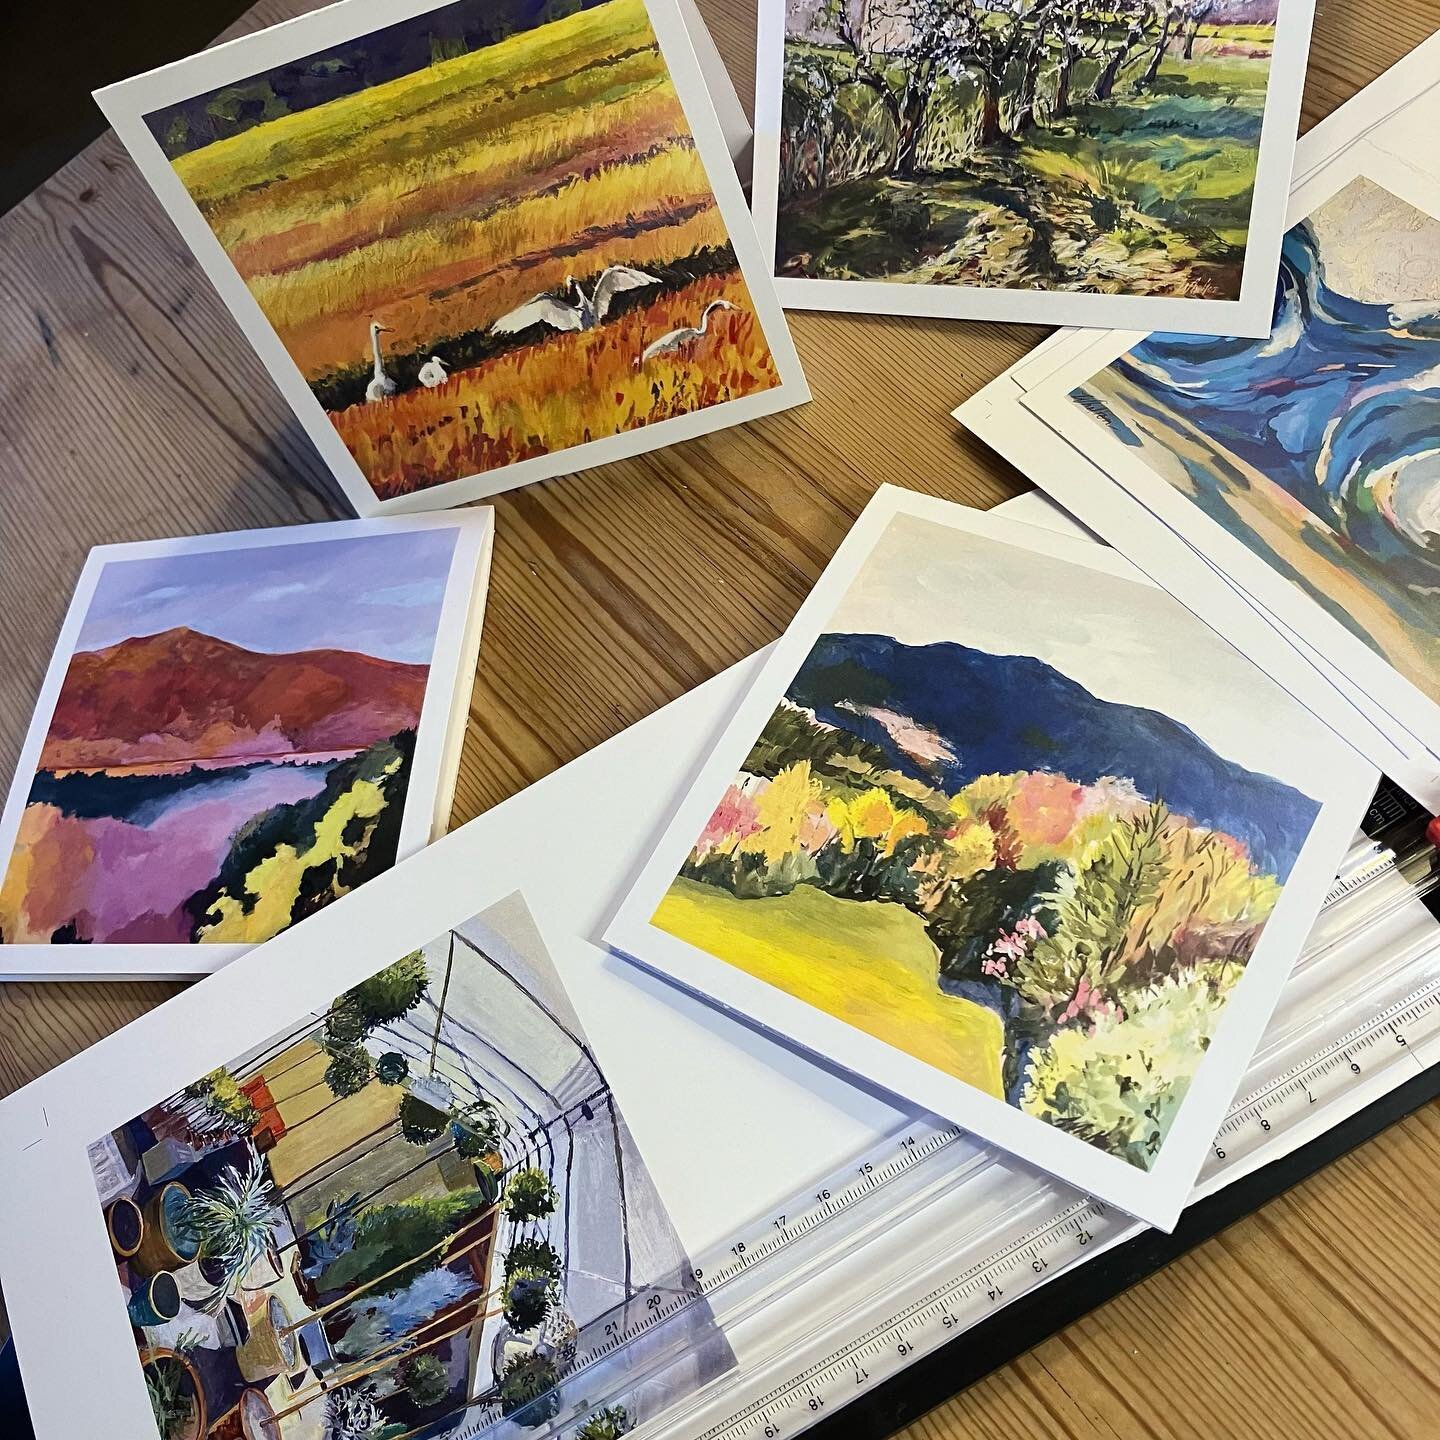 Working on a new line of Greeting Cards based on recent paintings. Today was the color check at the printer. Getting excited! More to come when they hit the press this fall!